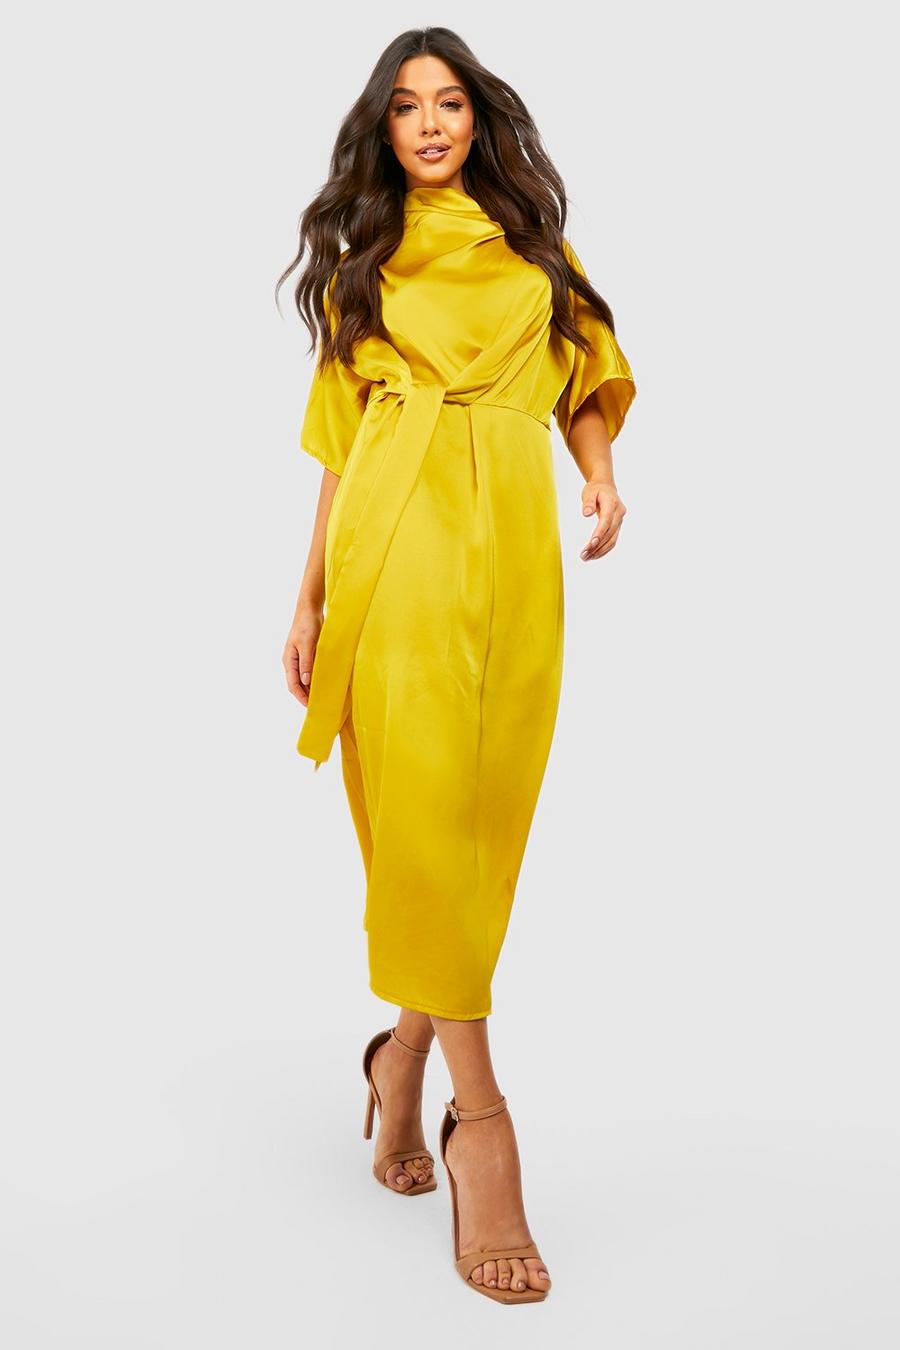 Ochre yellow Satin Knot Front Cowl Neck Midi Dress image number 1